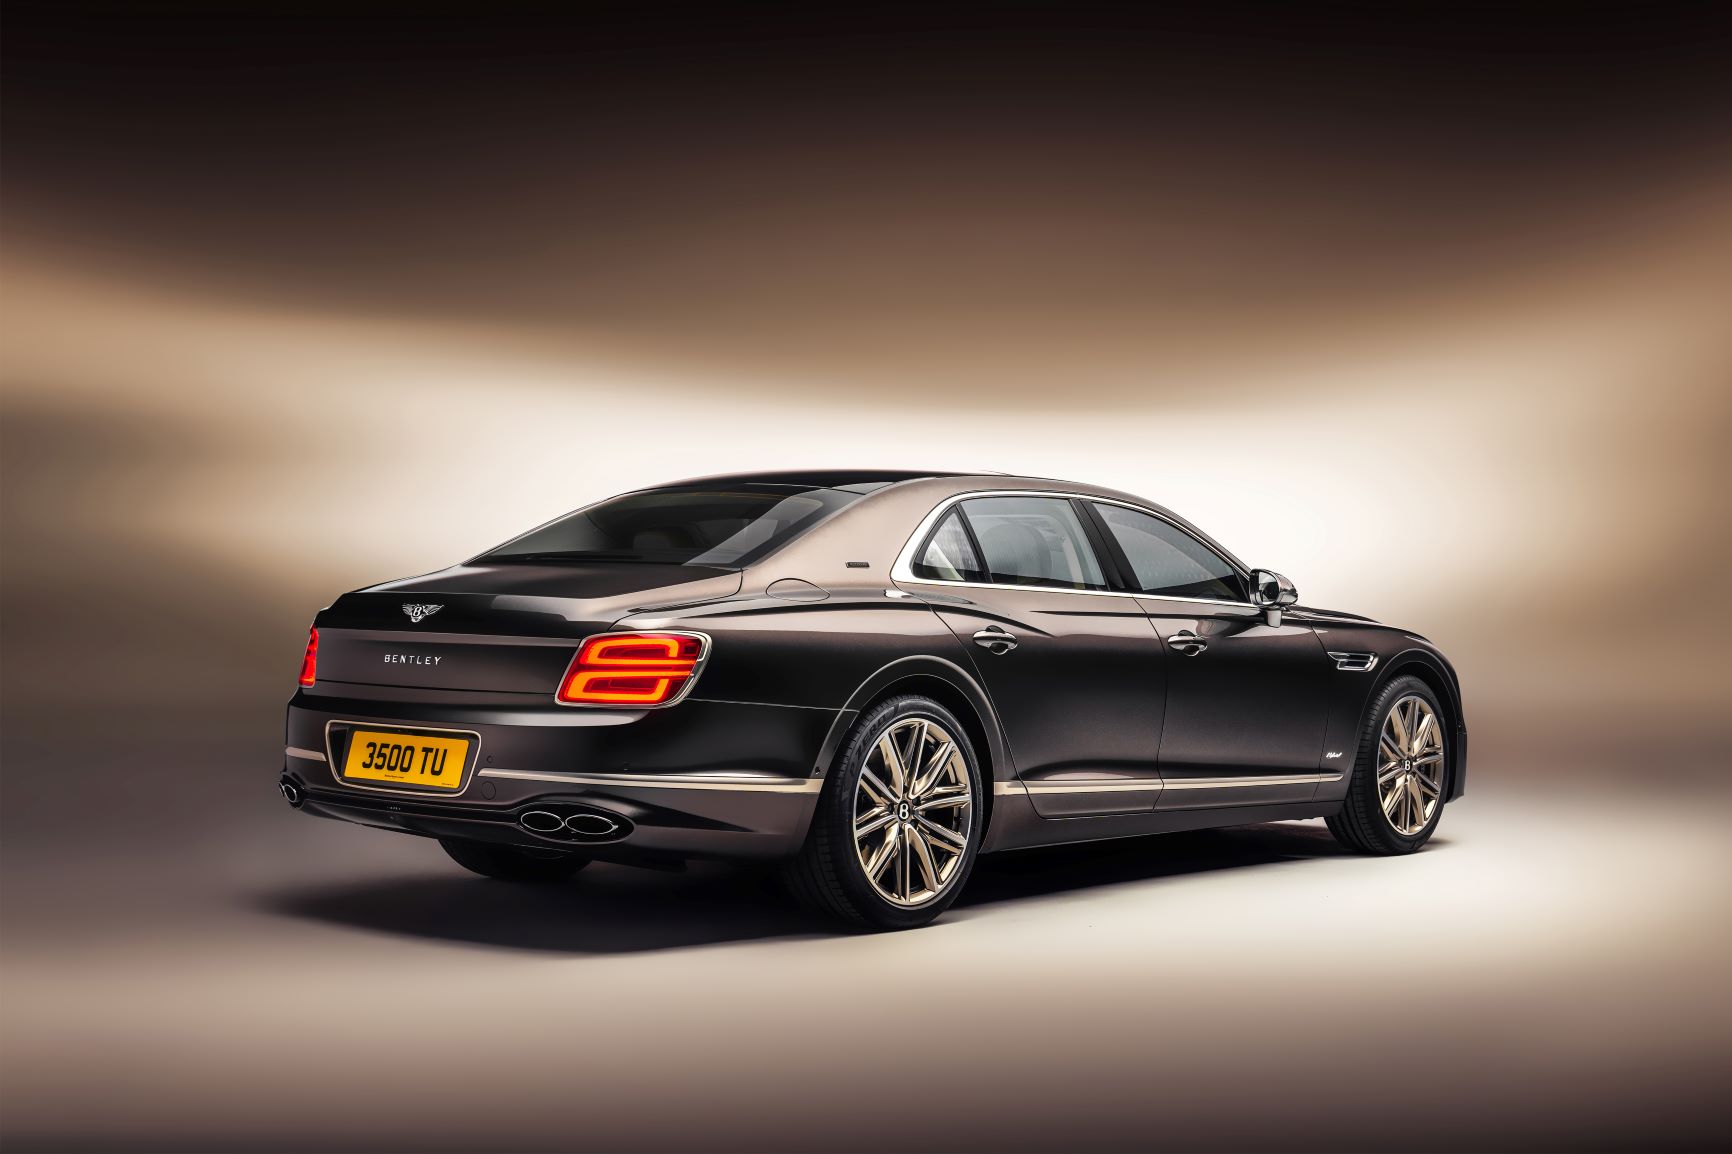 Rear three quarter picture of the Bentley Flying Spur Hybrid Odyssean edition